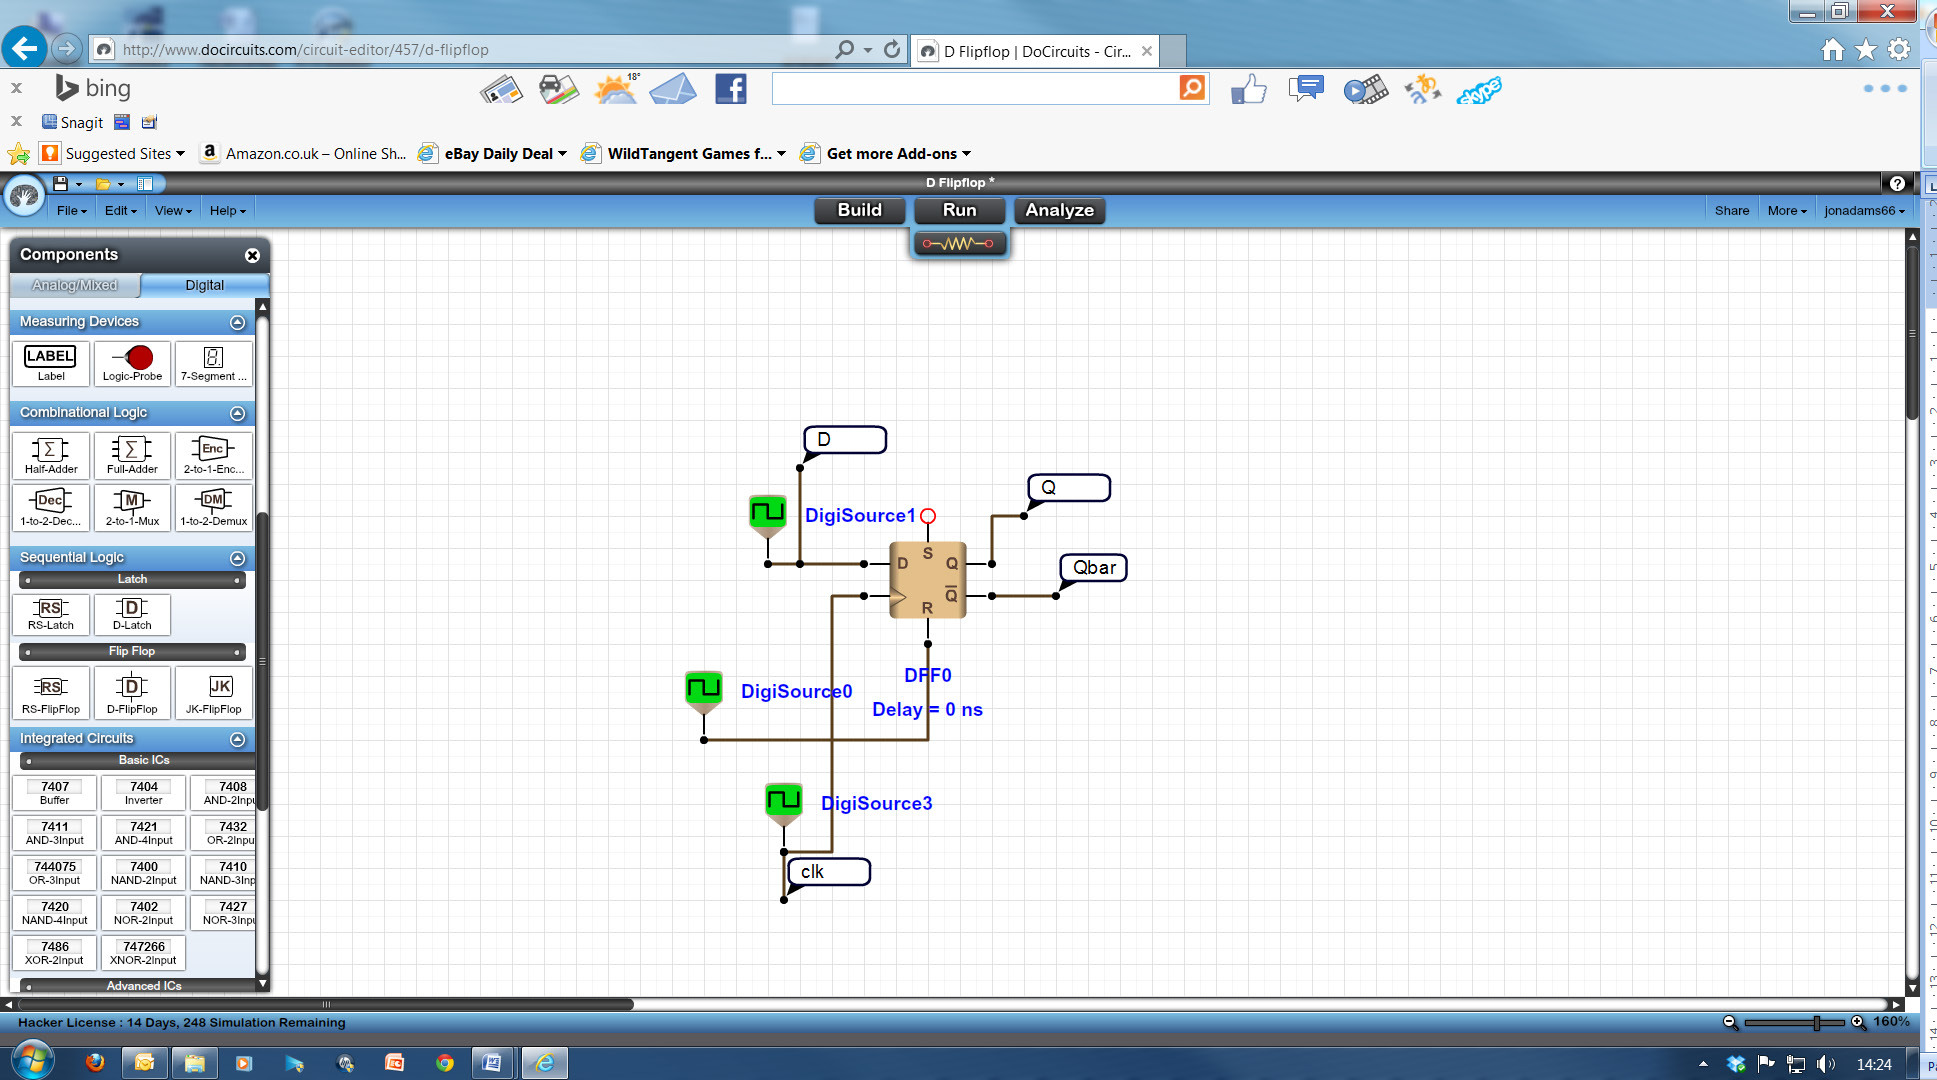 Learners have been provided with a link to a free web-based simulation tool, although they may have access to alternative simulation tools. http://www.docircuits.